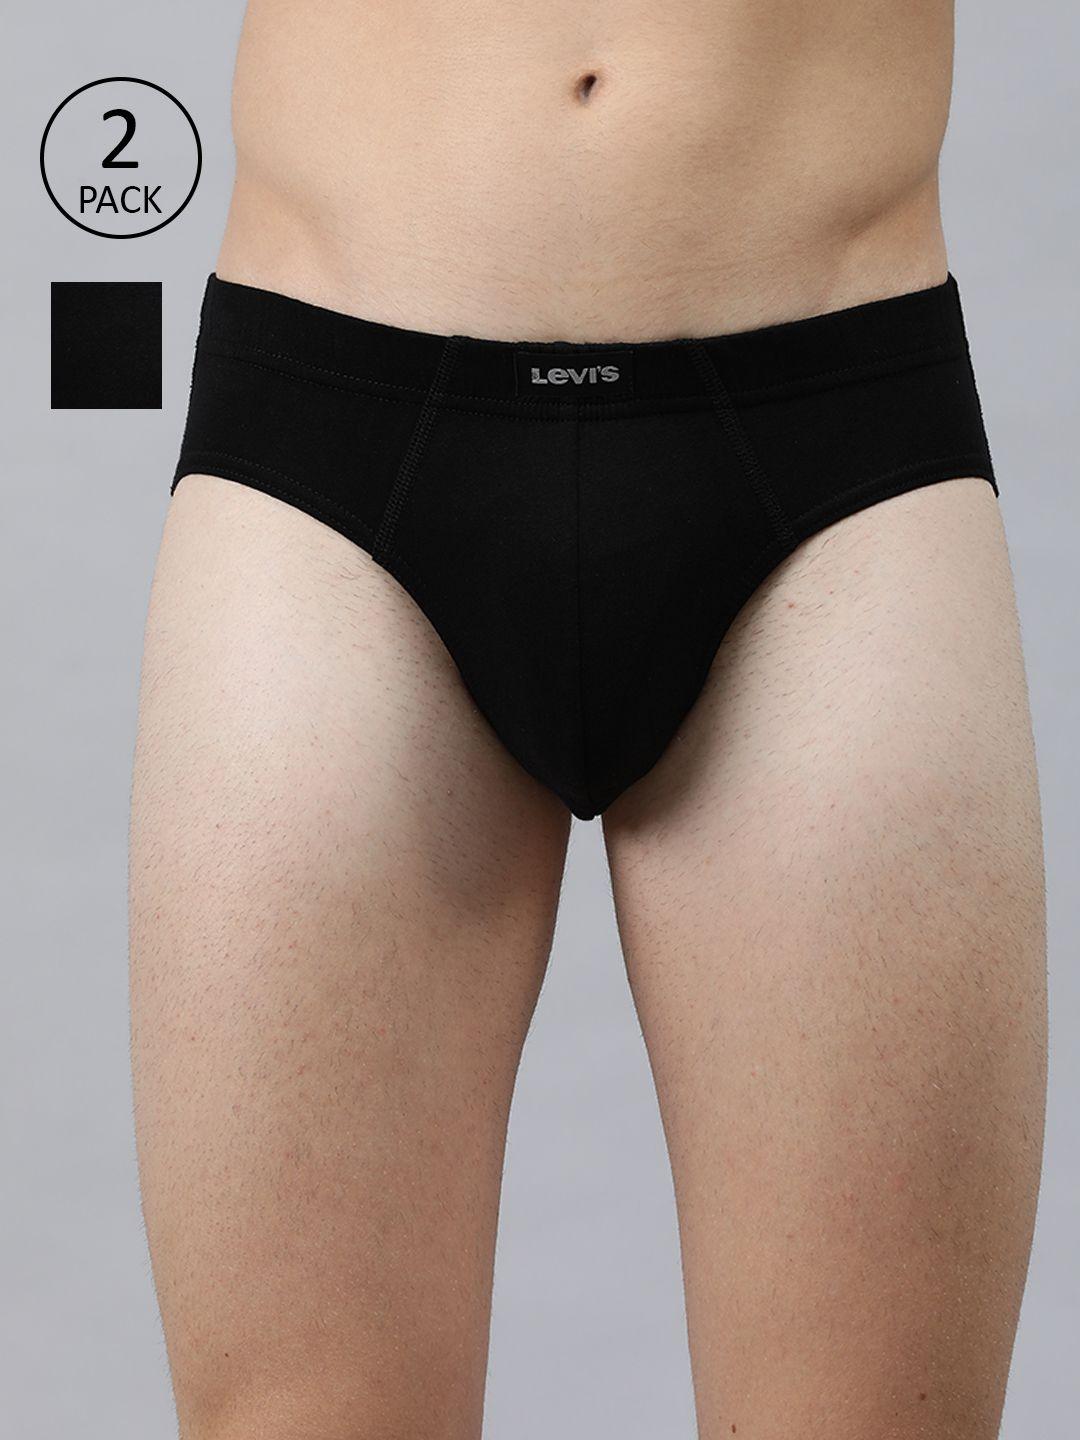 levis men's pack of 2 black solid antimicrobial brief #011